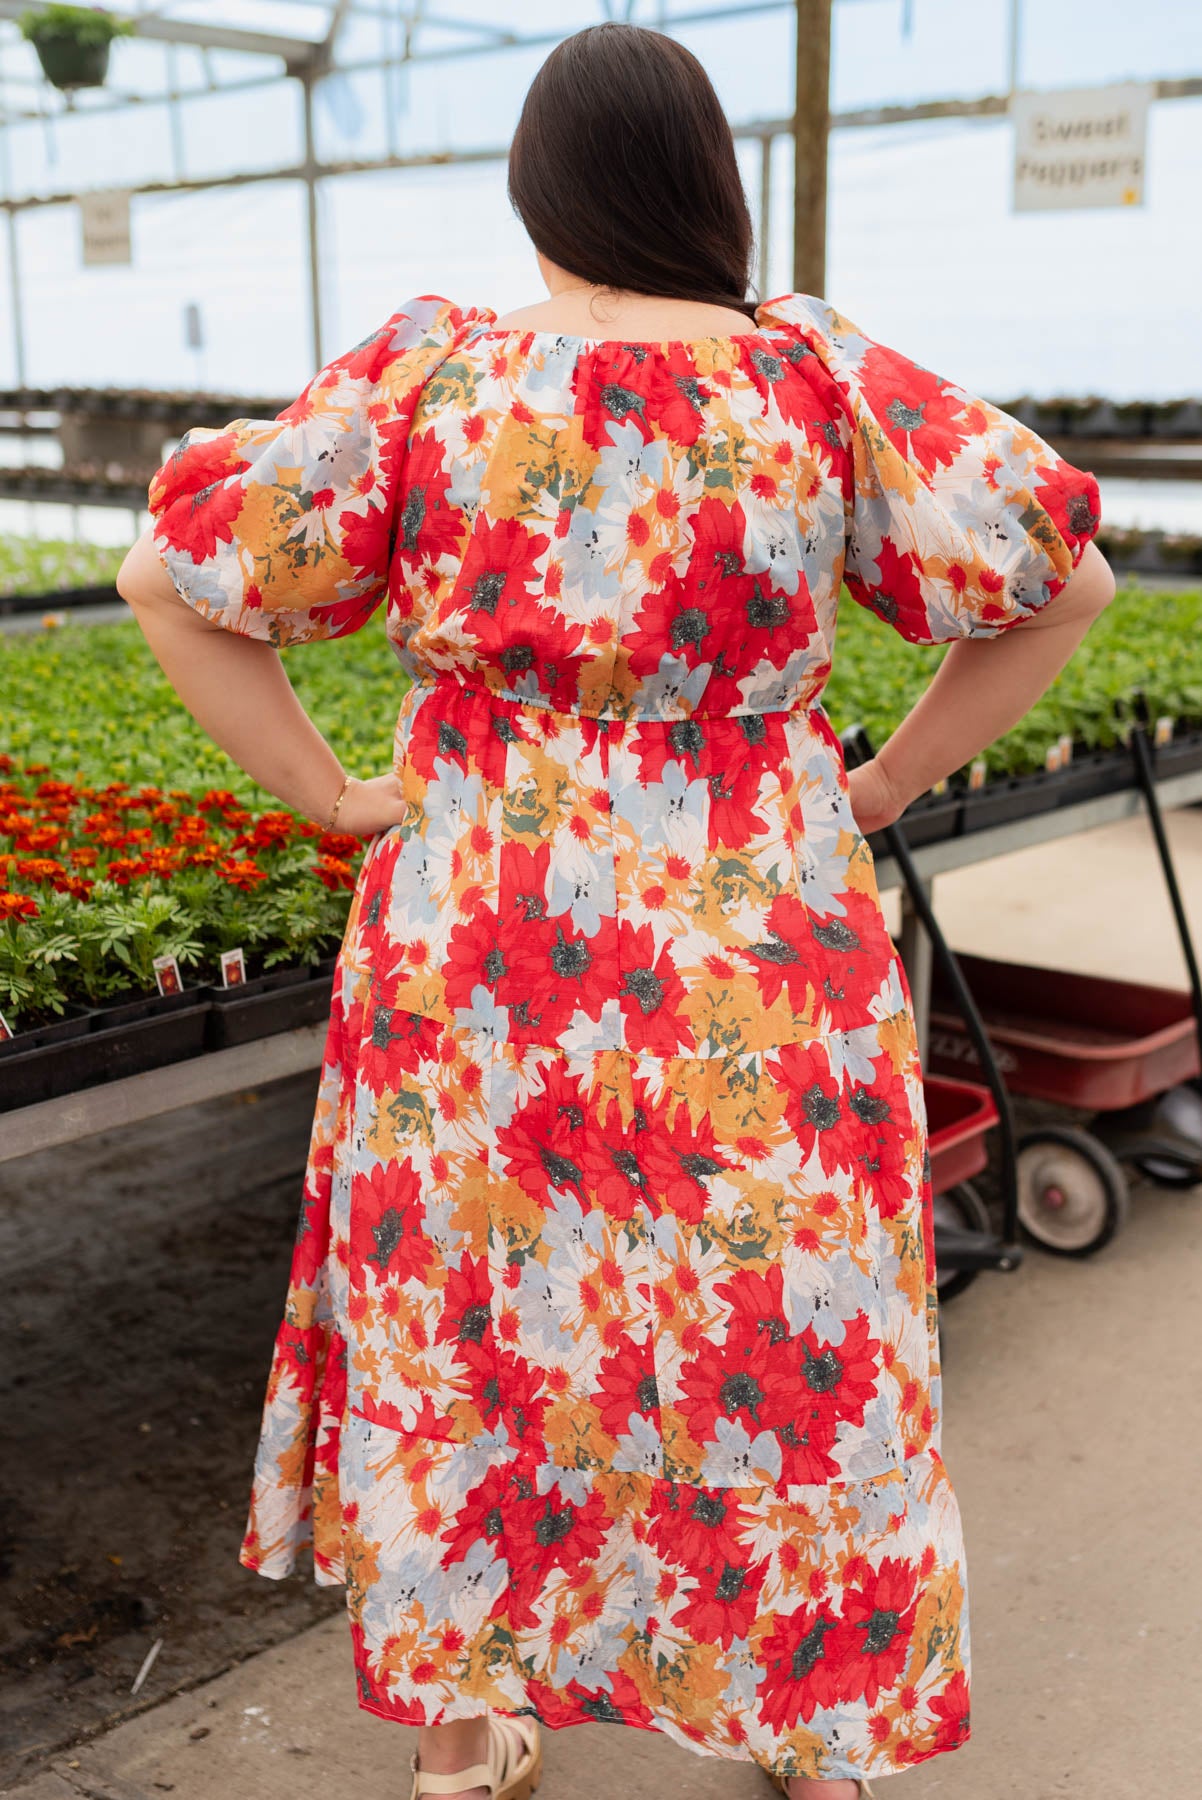 Back view of the plus size red floral dress